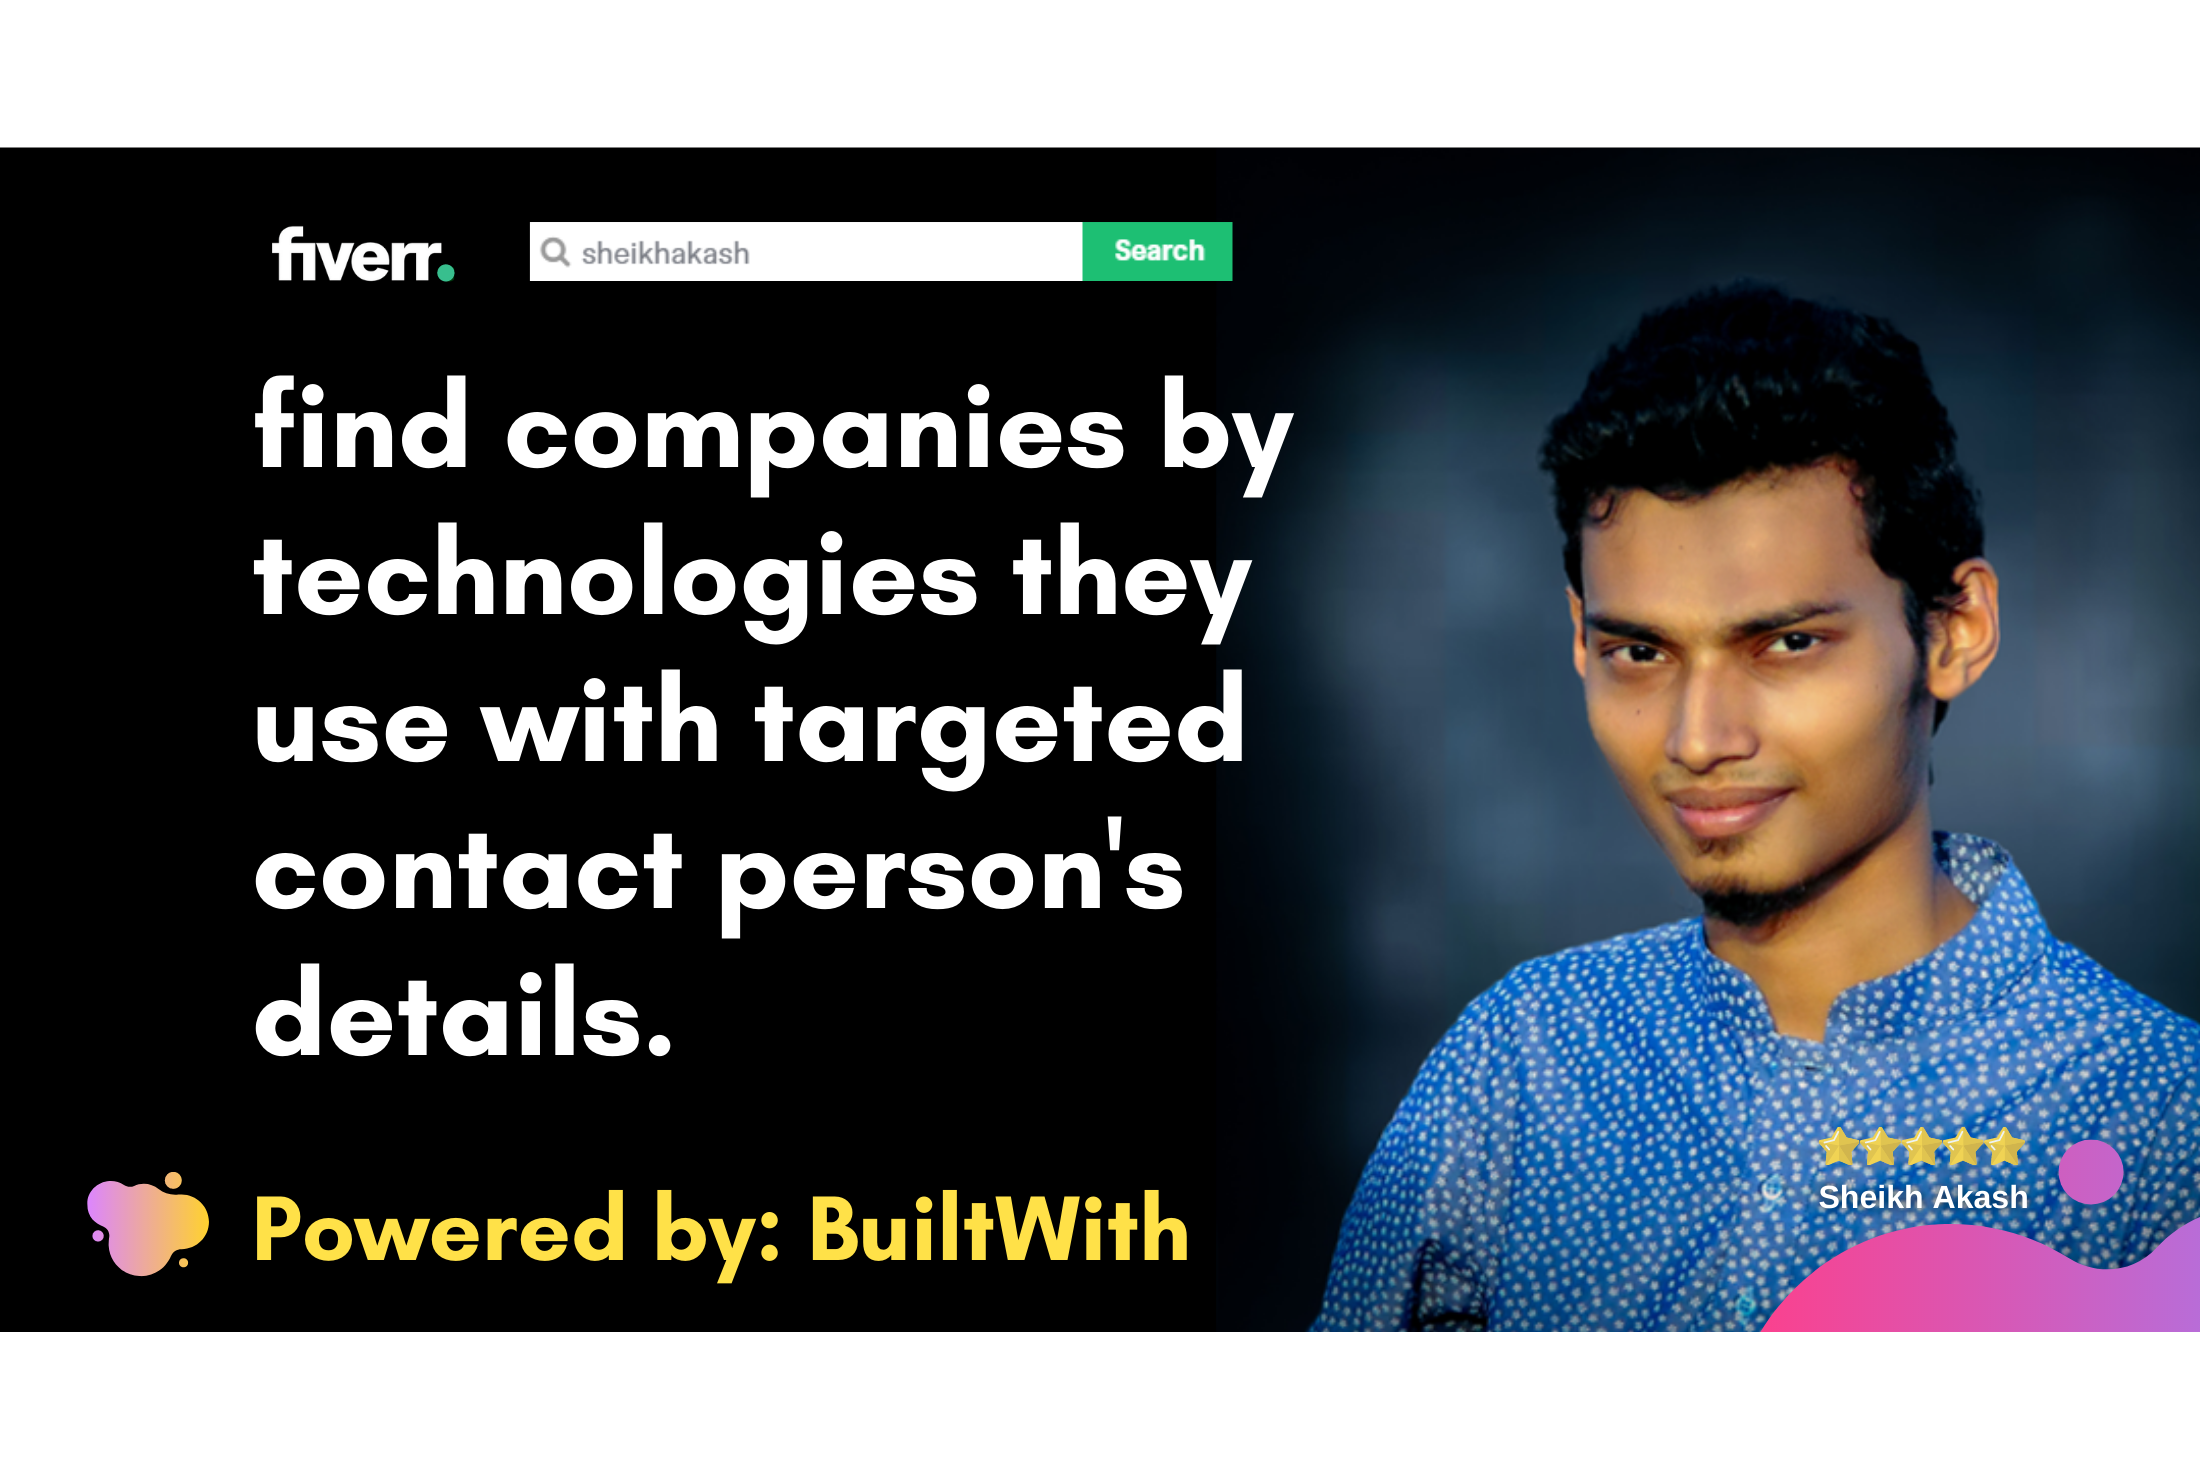 find companies by technologies they use with contact persons